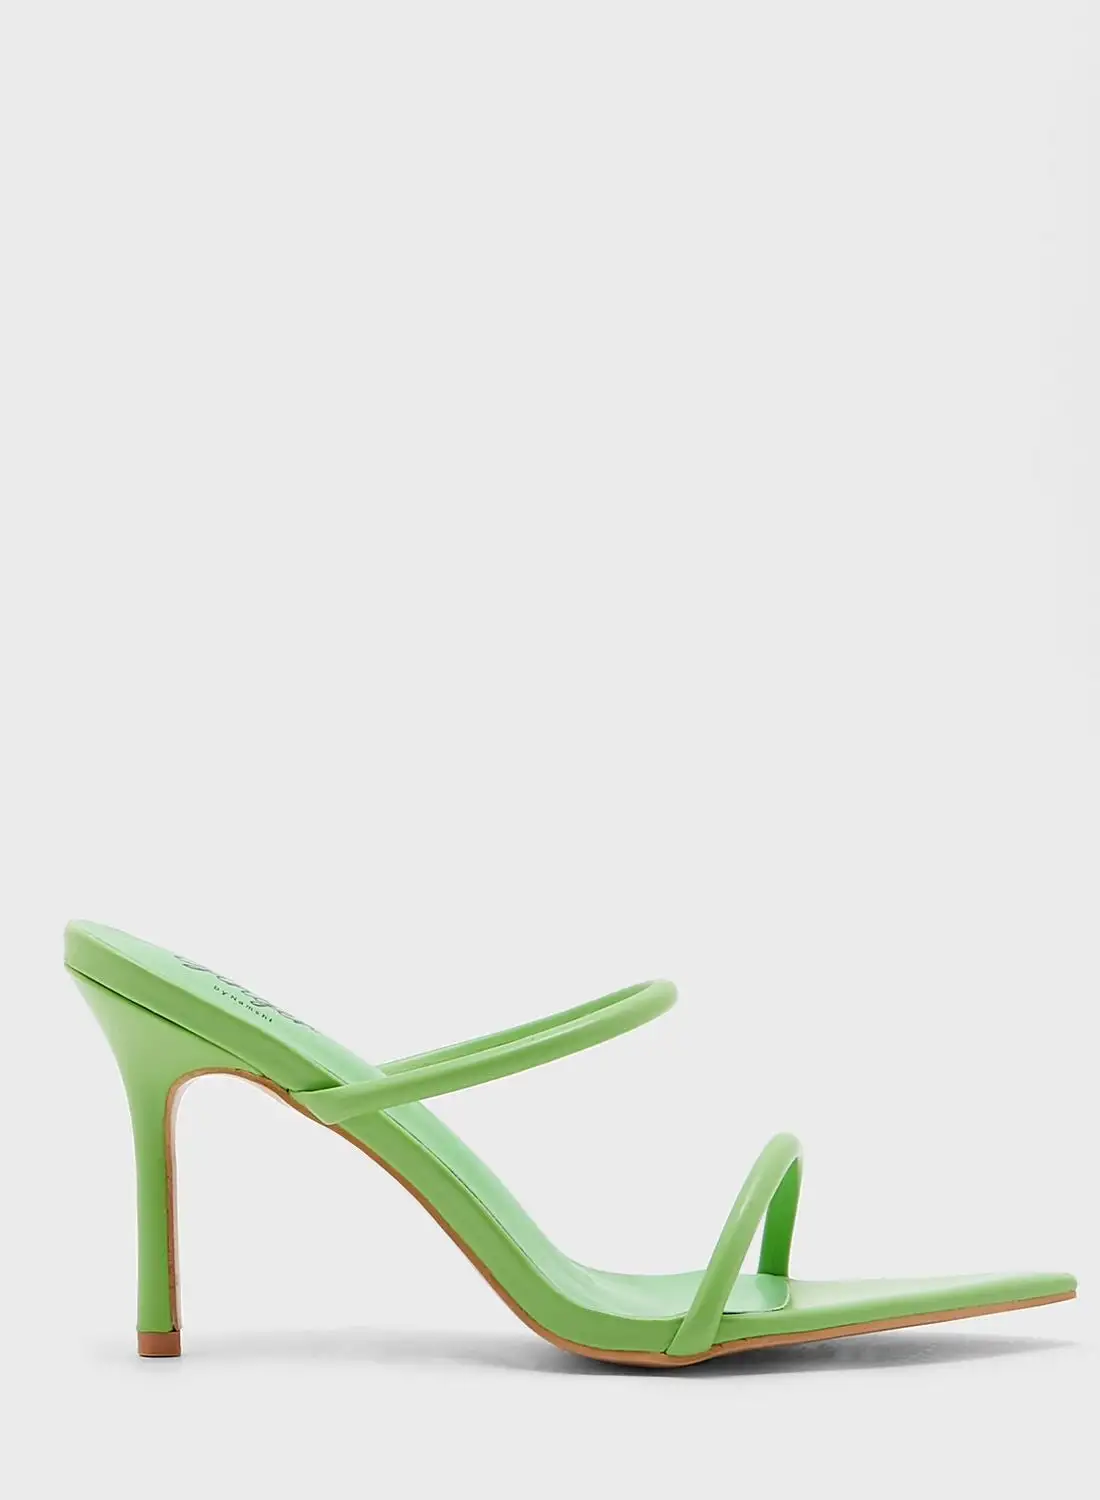 Ginger Double Strap Pointed Toe Mule Sandal